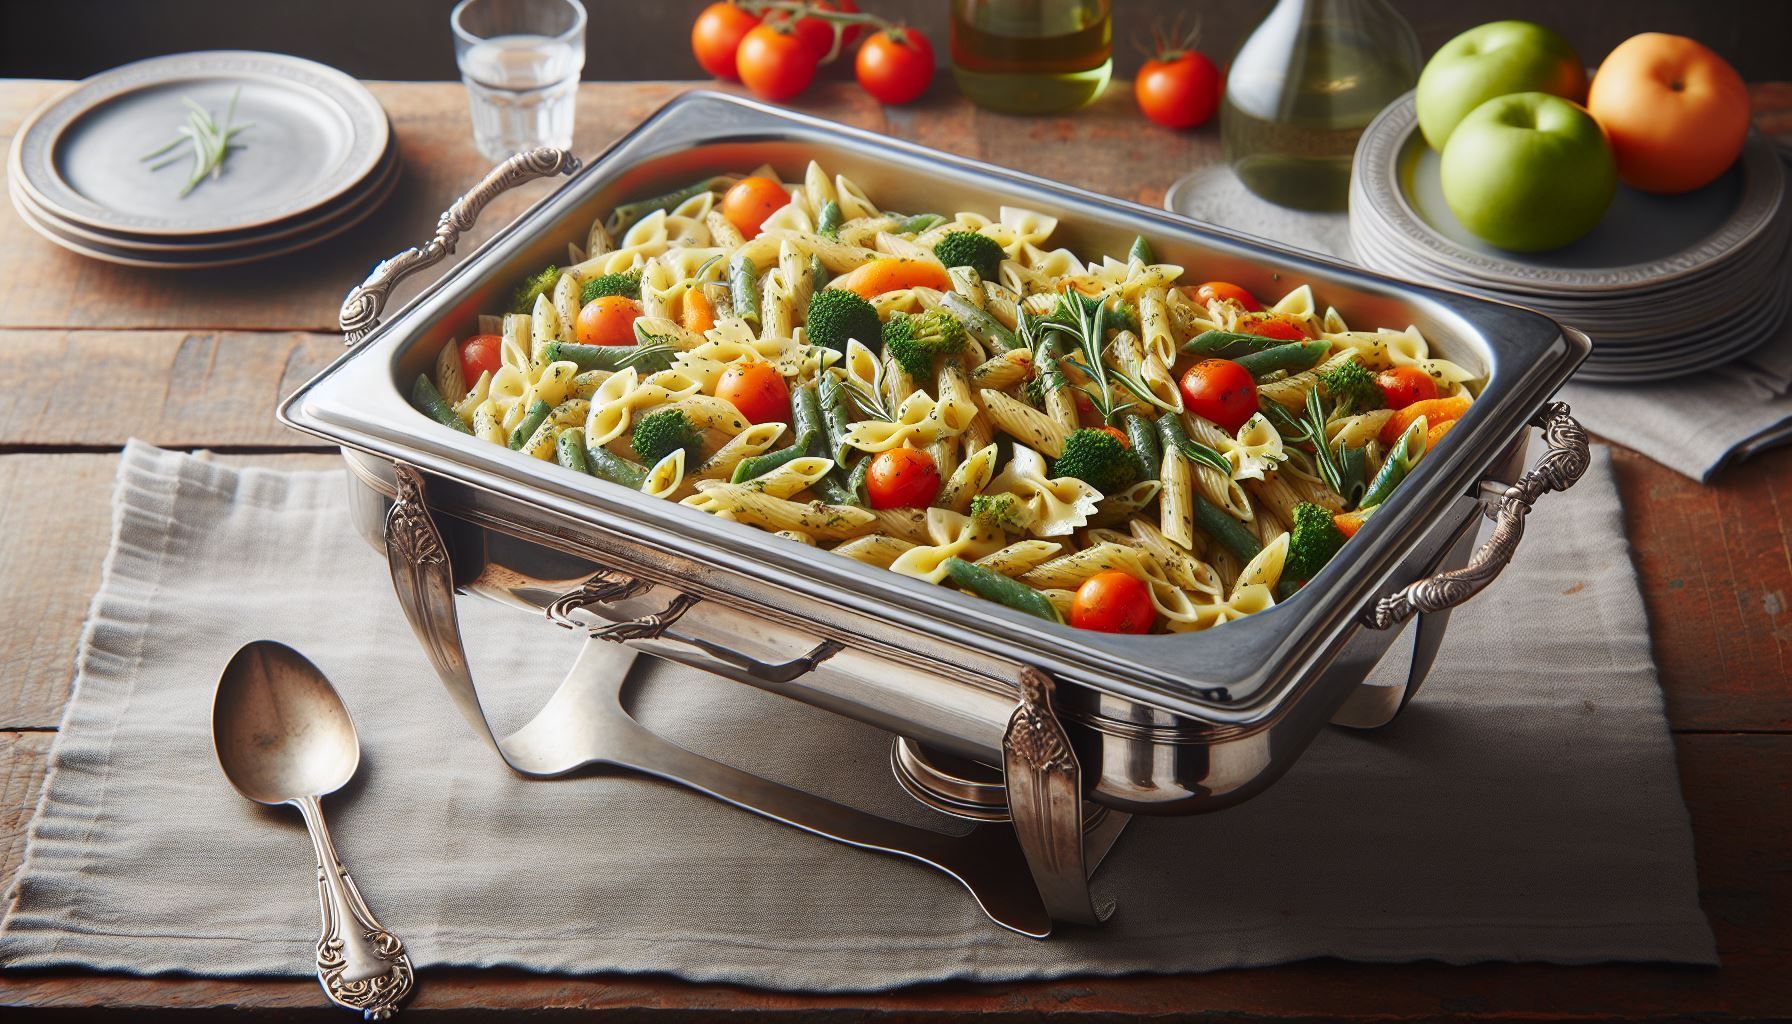 A casserole dish filled with pasta and vegetables is on a table.